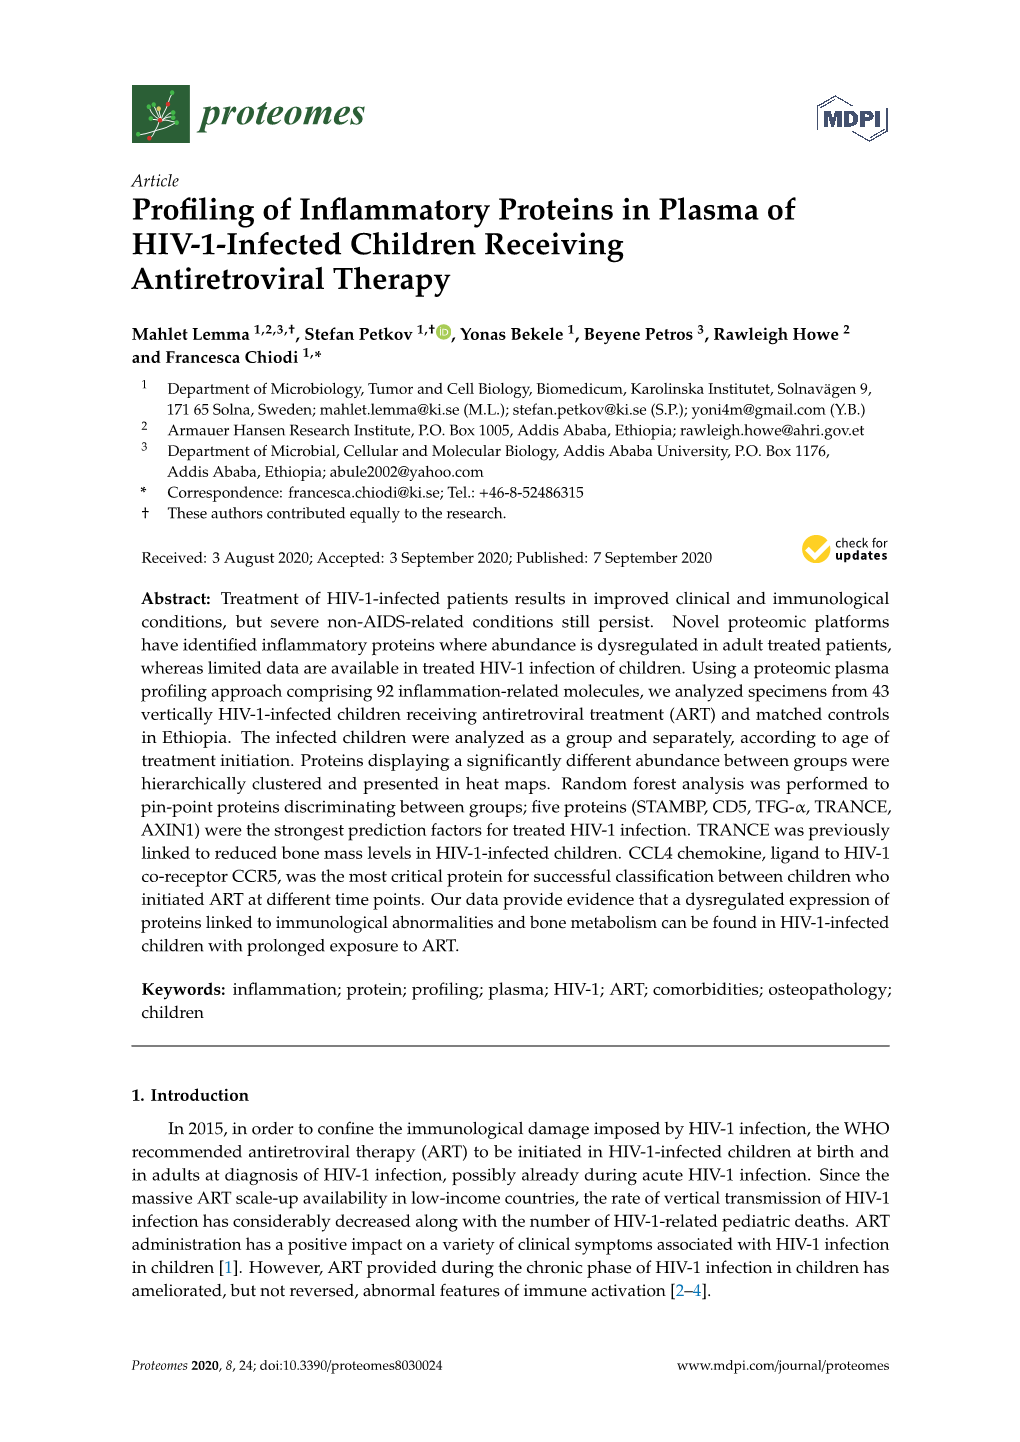 Profiling of Inflammatory Proteins in Plasma of HIV-1-Infected Children